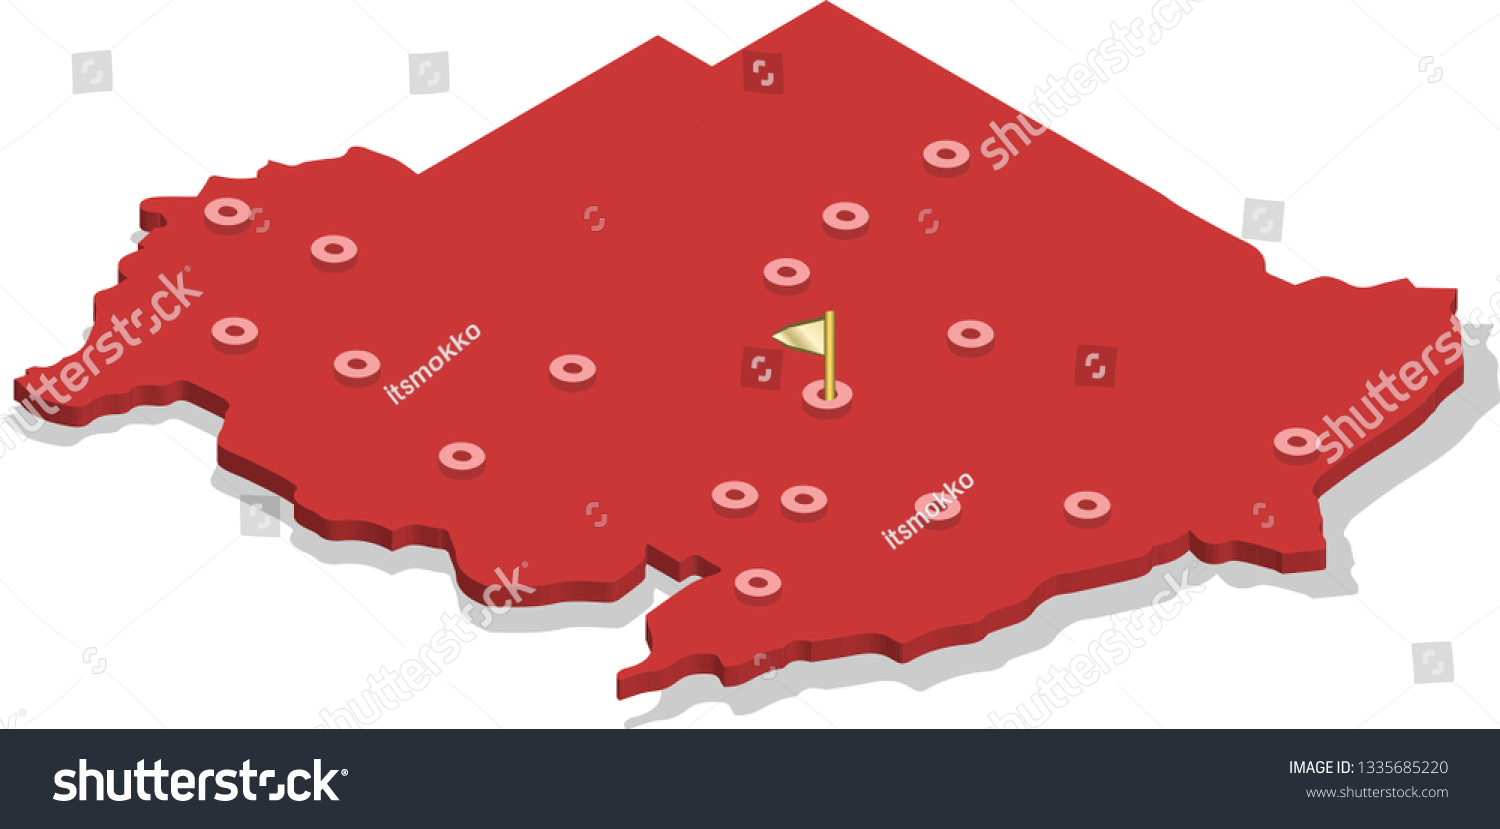 3d isometric volume view map of Sudan with red surface and cities, capital. Isolated, white background #1335685220